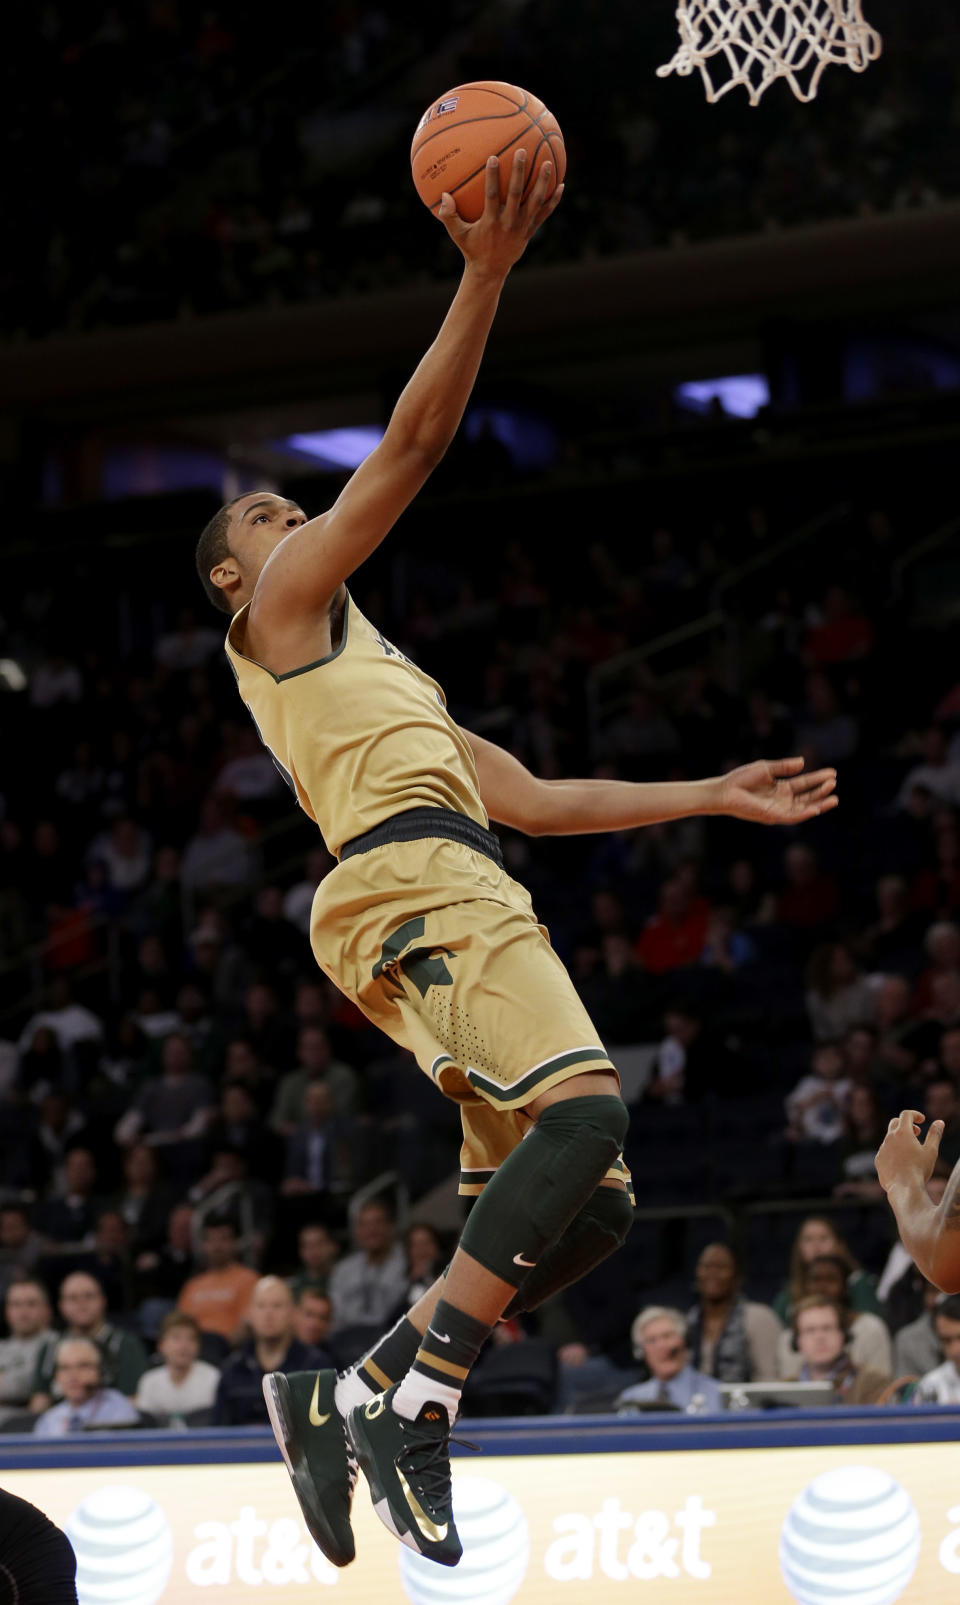 Michigan State's Alvin Ellis III scores during the first half of an NCAA basketball game against Georgetown at Madison Square Garden, Saturday, Feb. 1, 2014, in New York. (AP Photo/Seth Wenig)